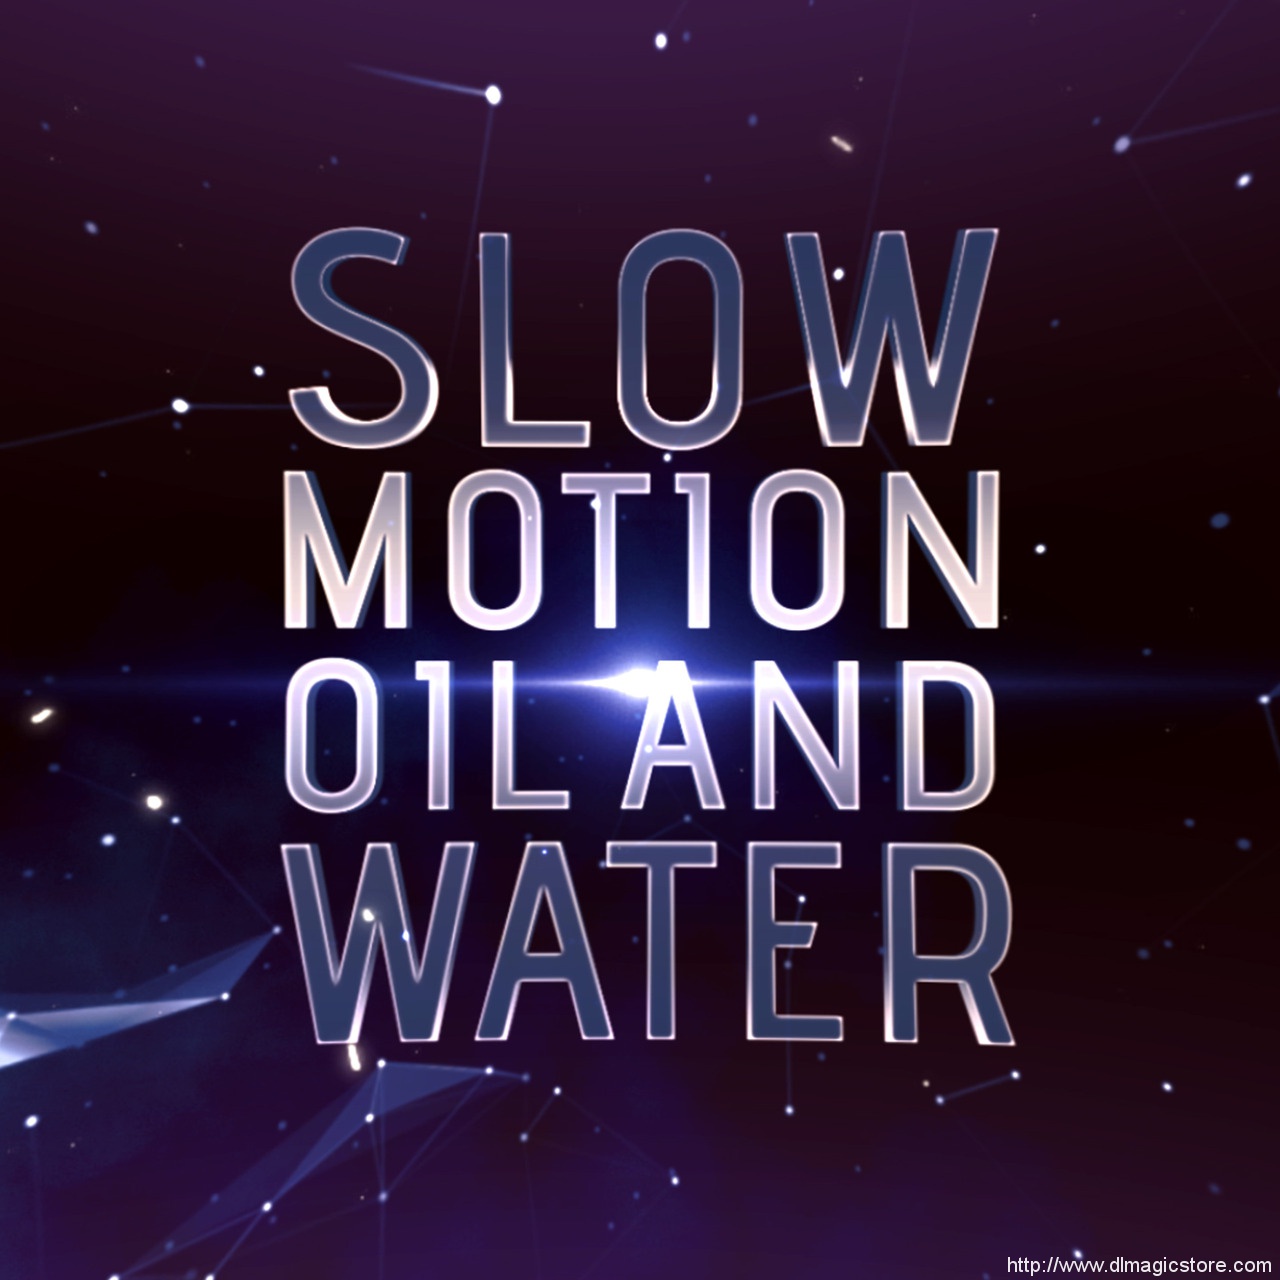 Slow Motion Oil and Water by John Carey (Instant Download)